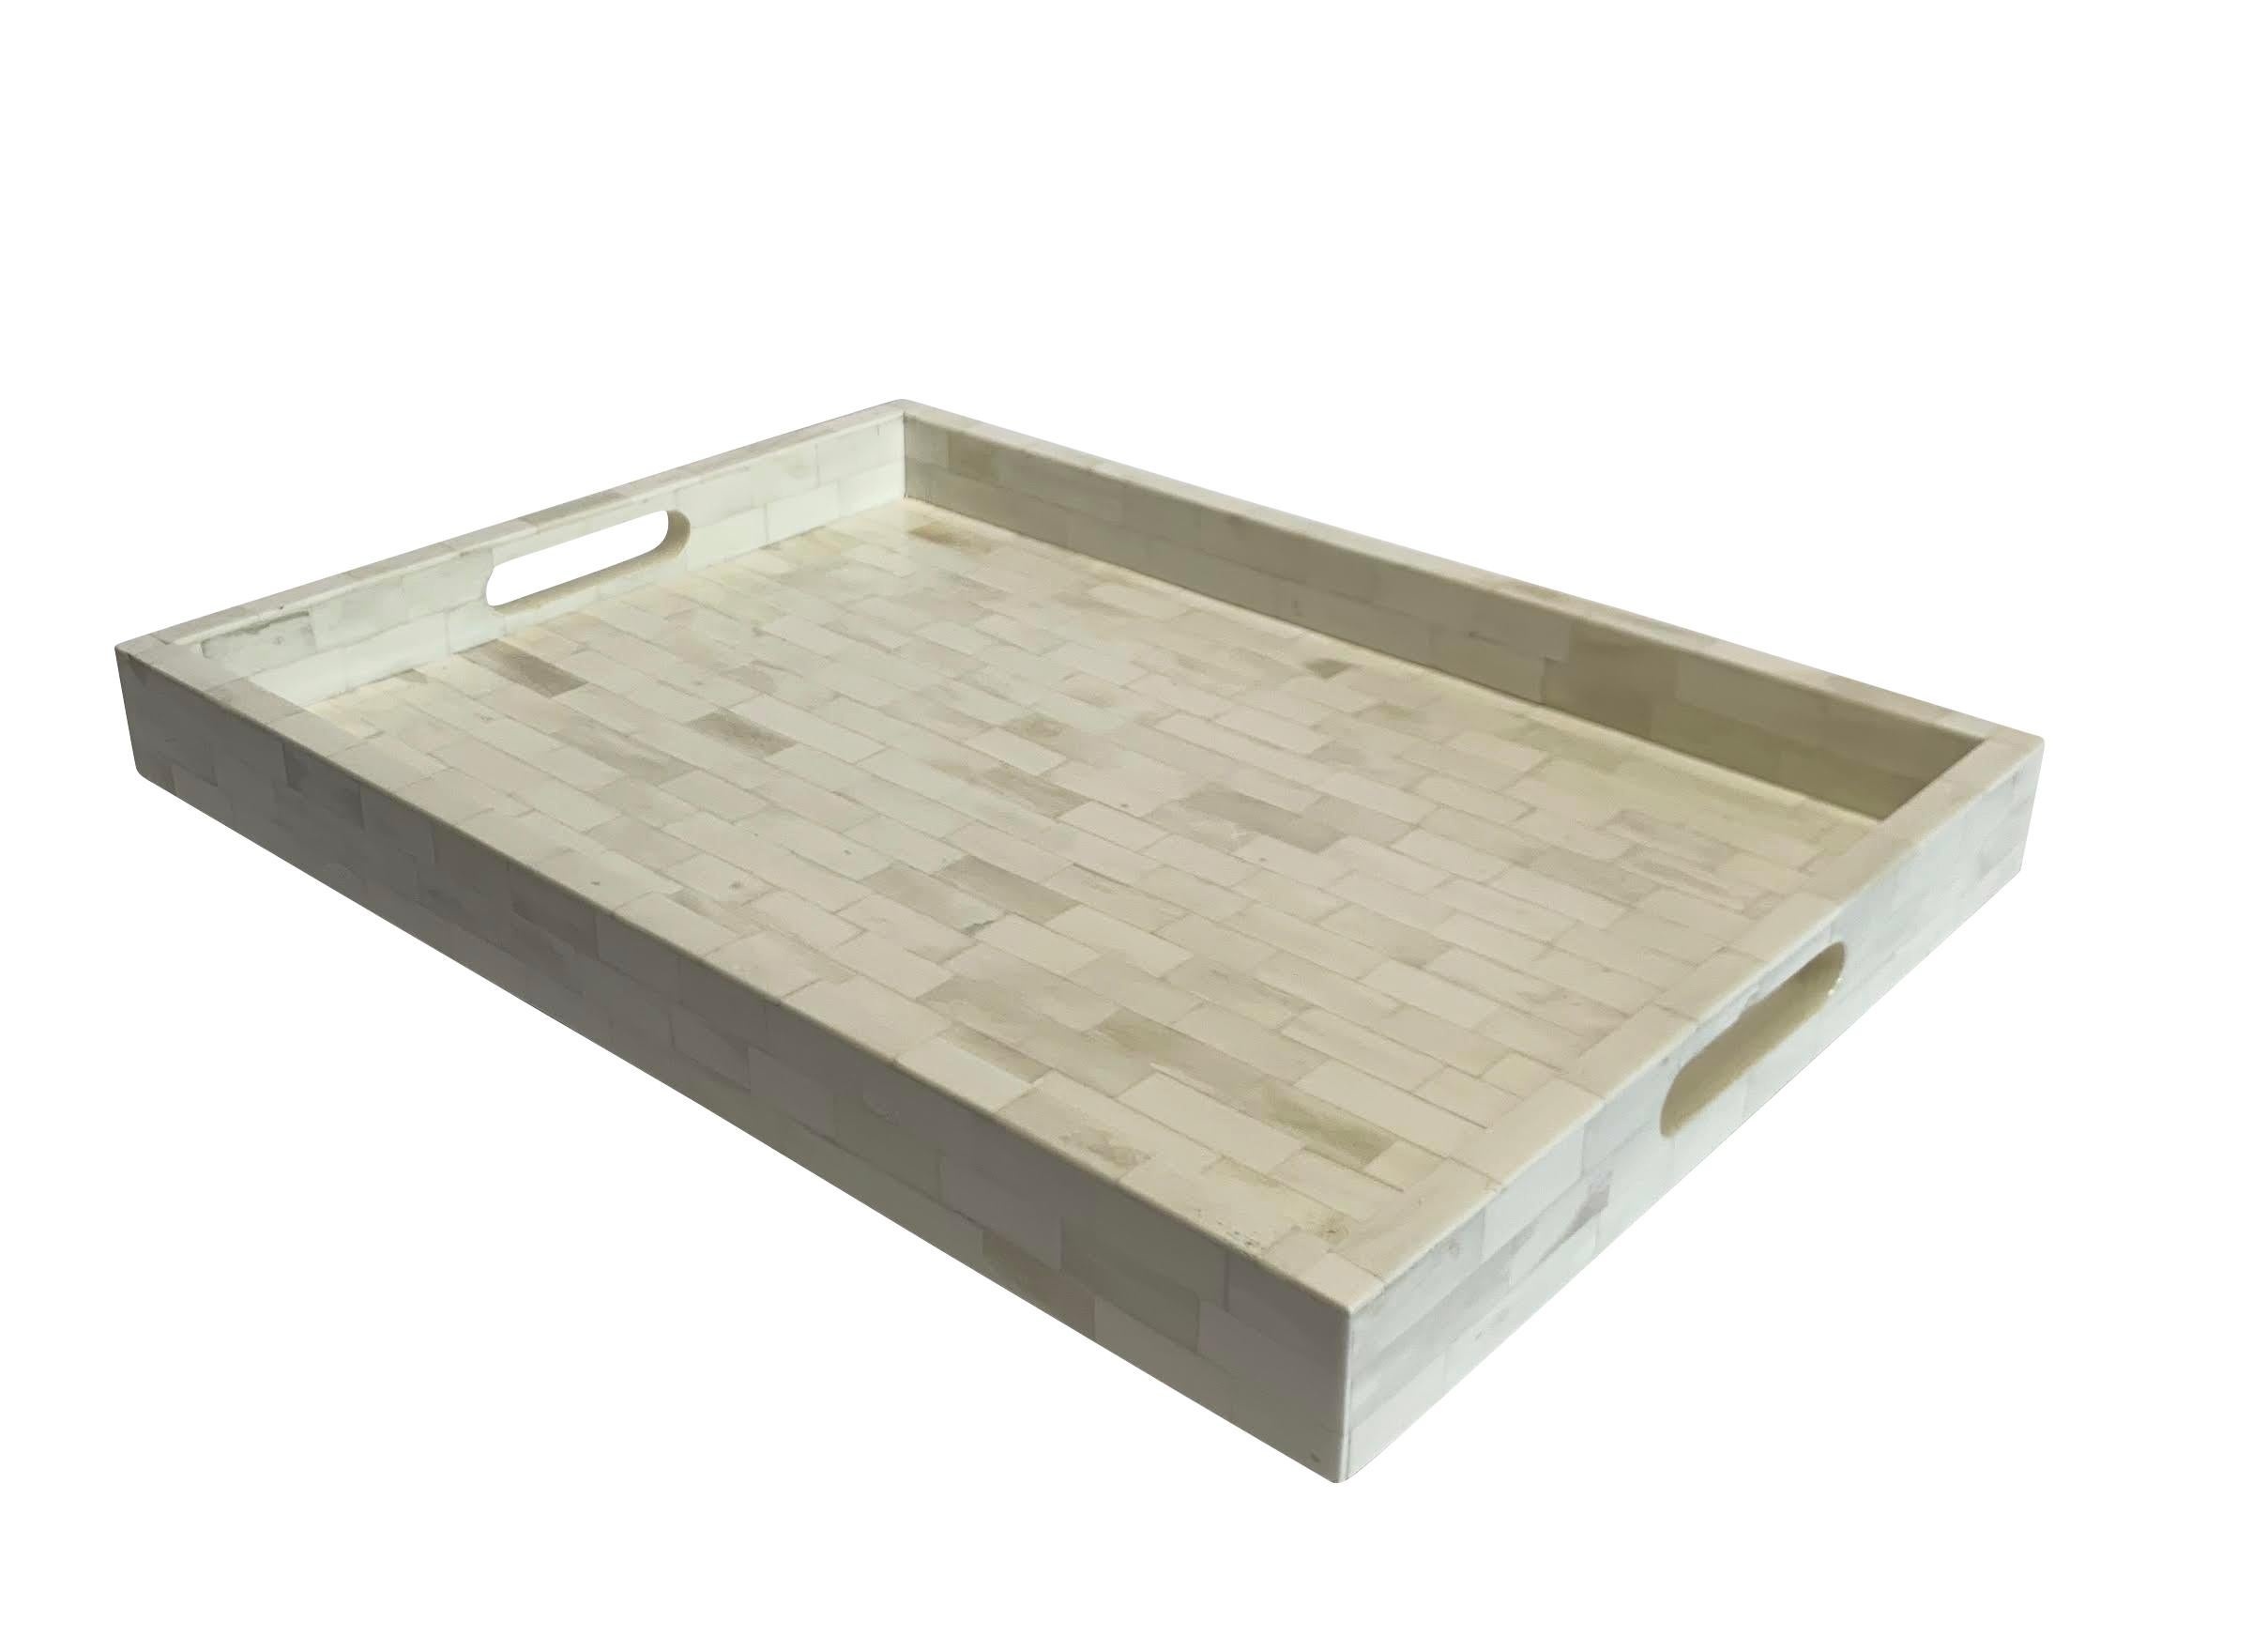 Contemporary Indian large cream bone tray with handles.
Also available in a smaller size with handles (S6539).
